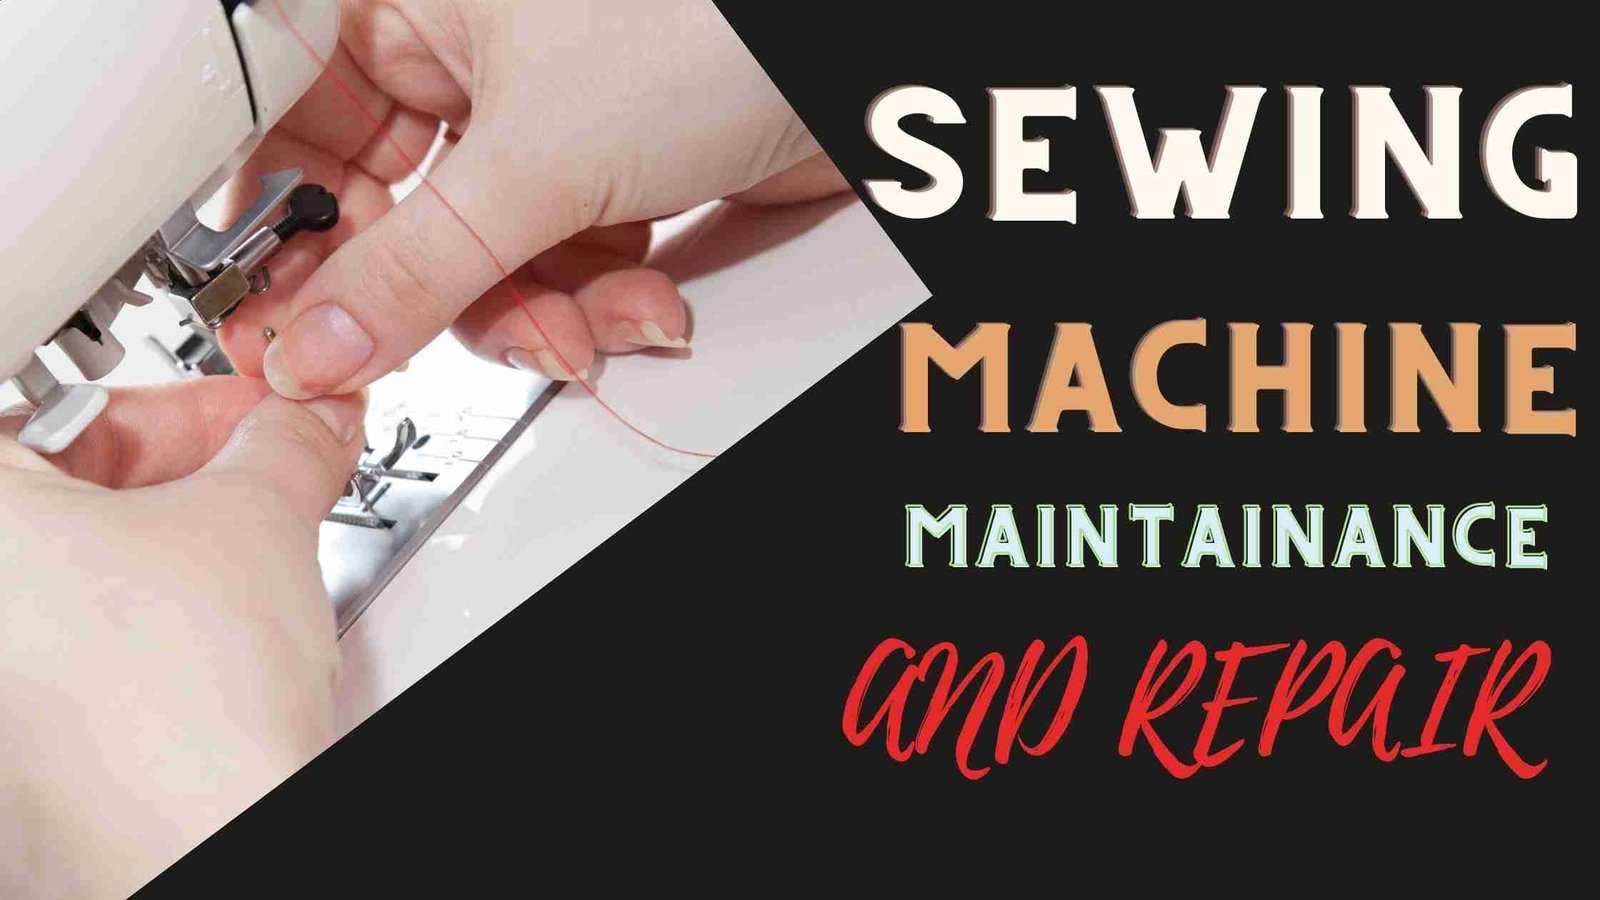 You are currently viewing SEWING MACHINE MAINTAINANCE AND REPAIR